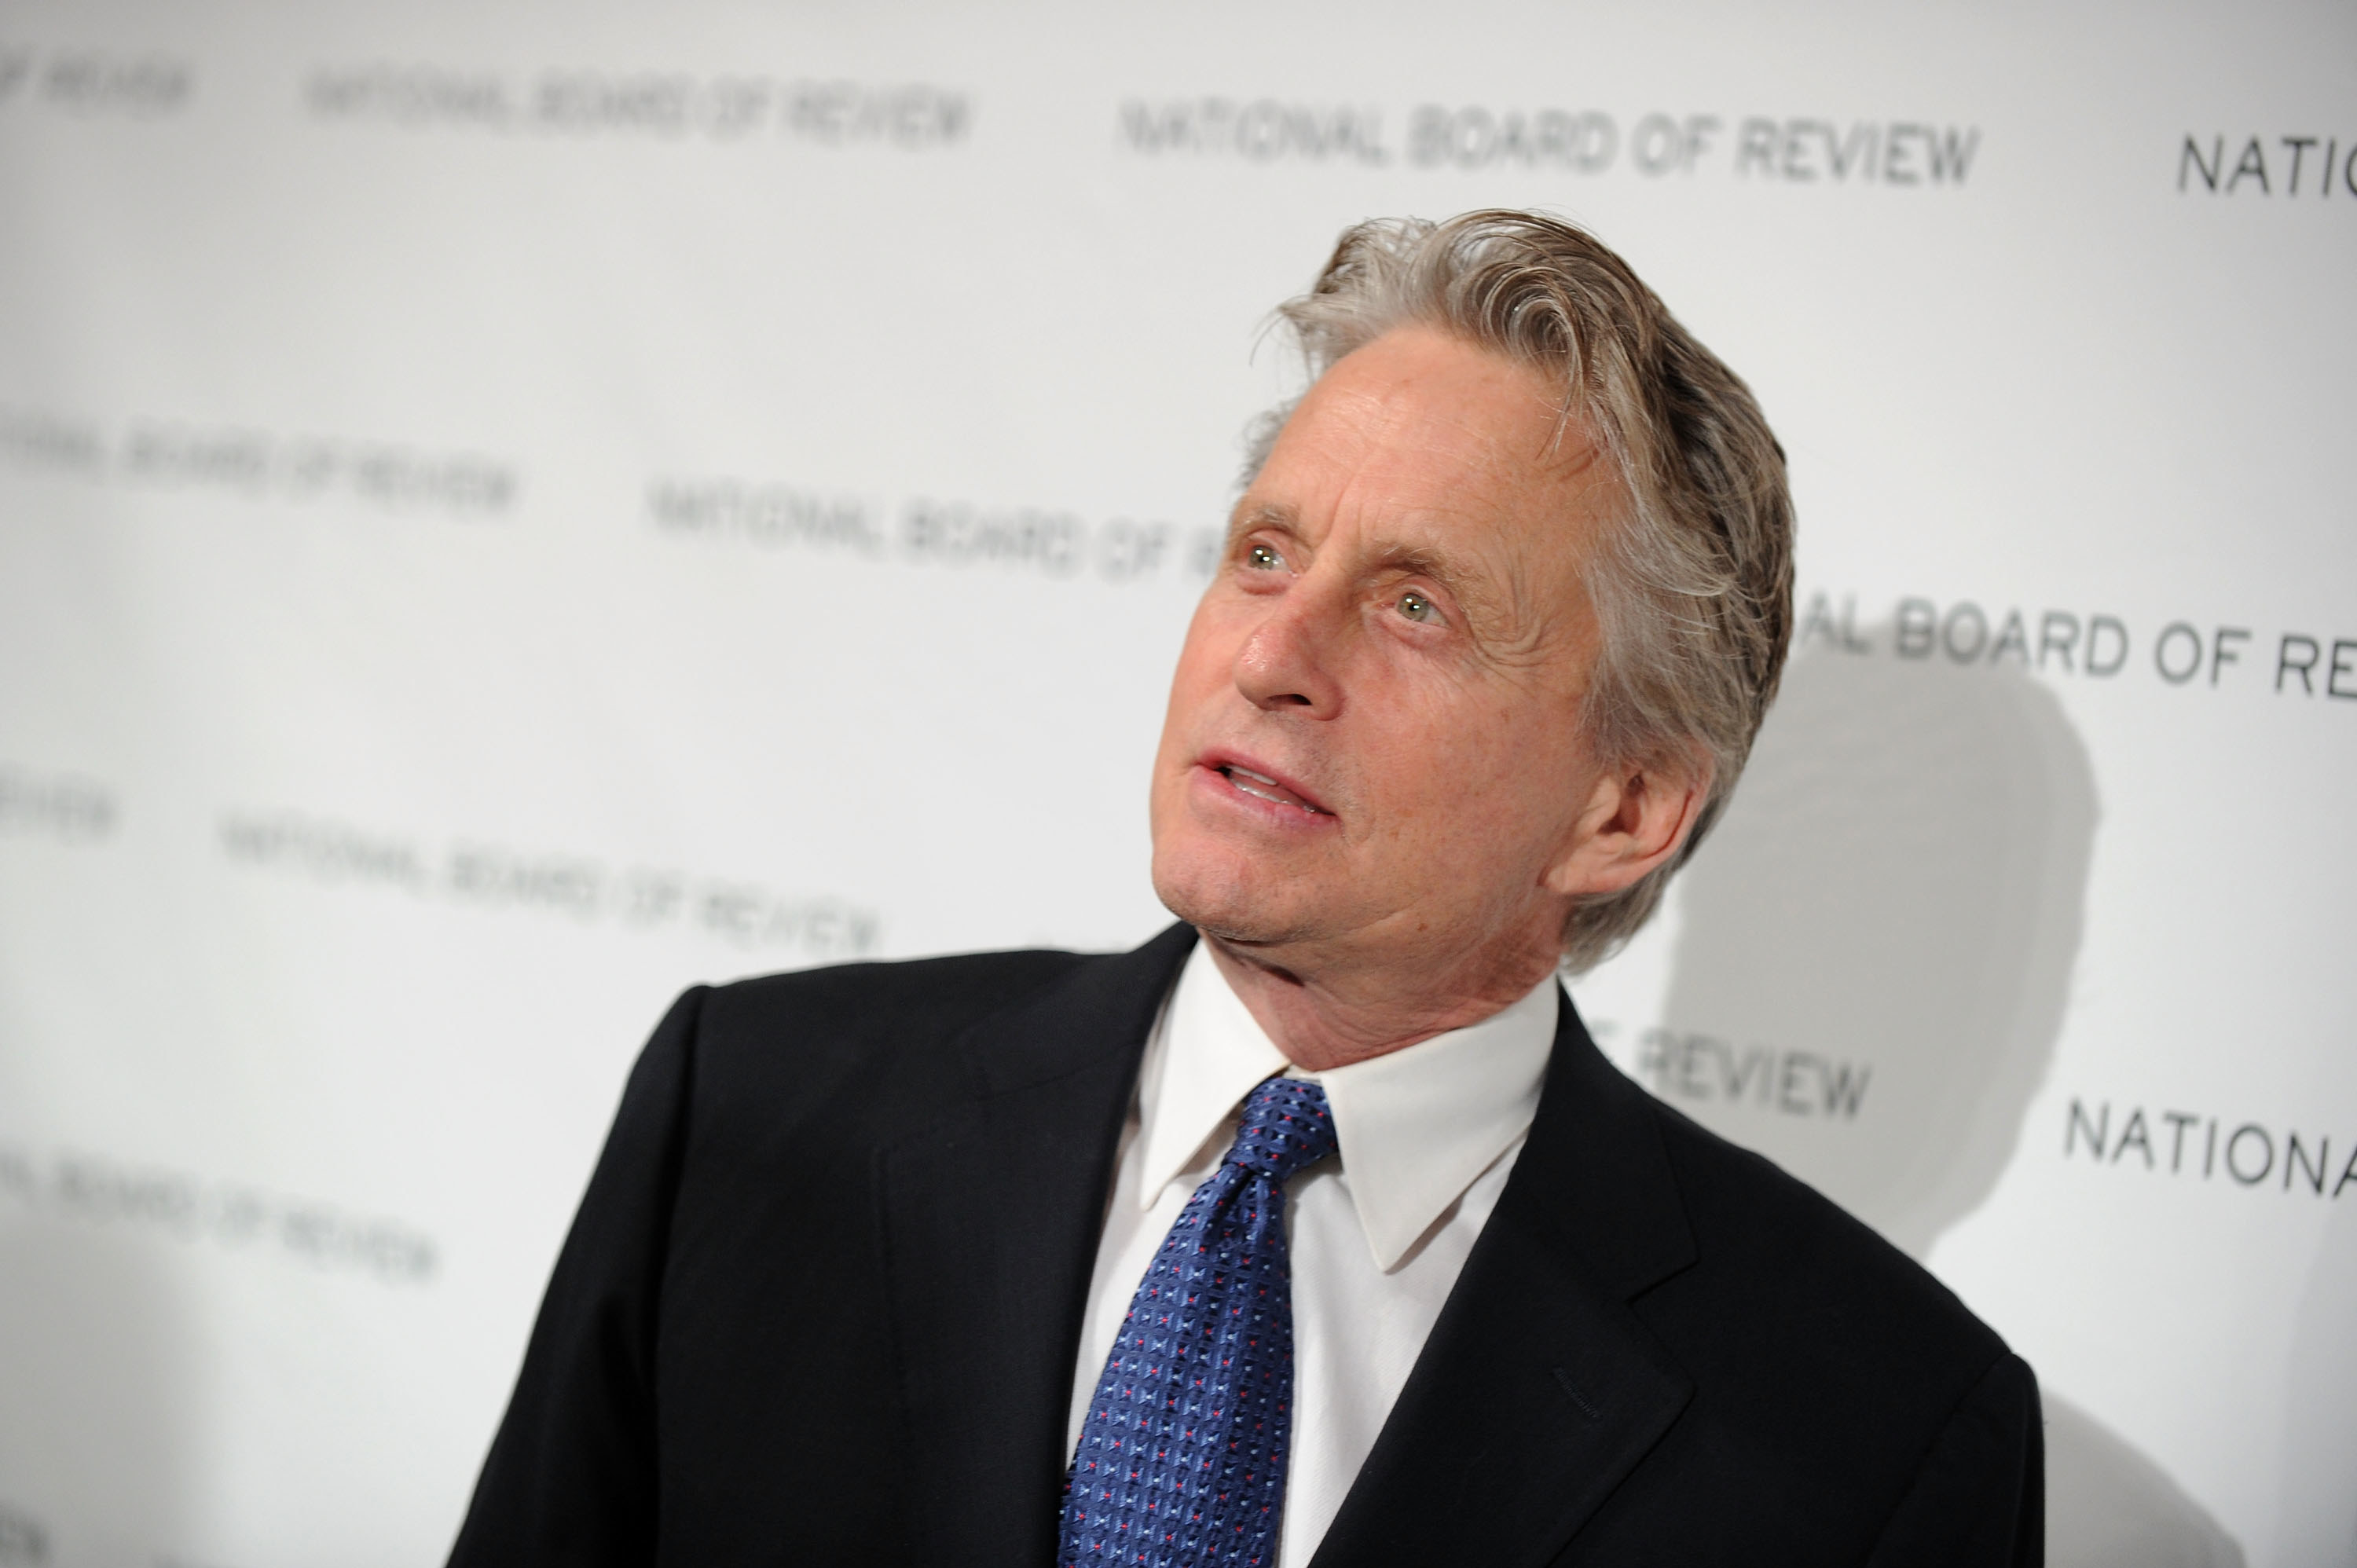  Michael Douglas attending the National Board of Review of Motion Pictures Awards gala in a black suit and blue tie in January 2010.